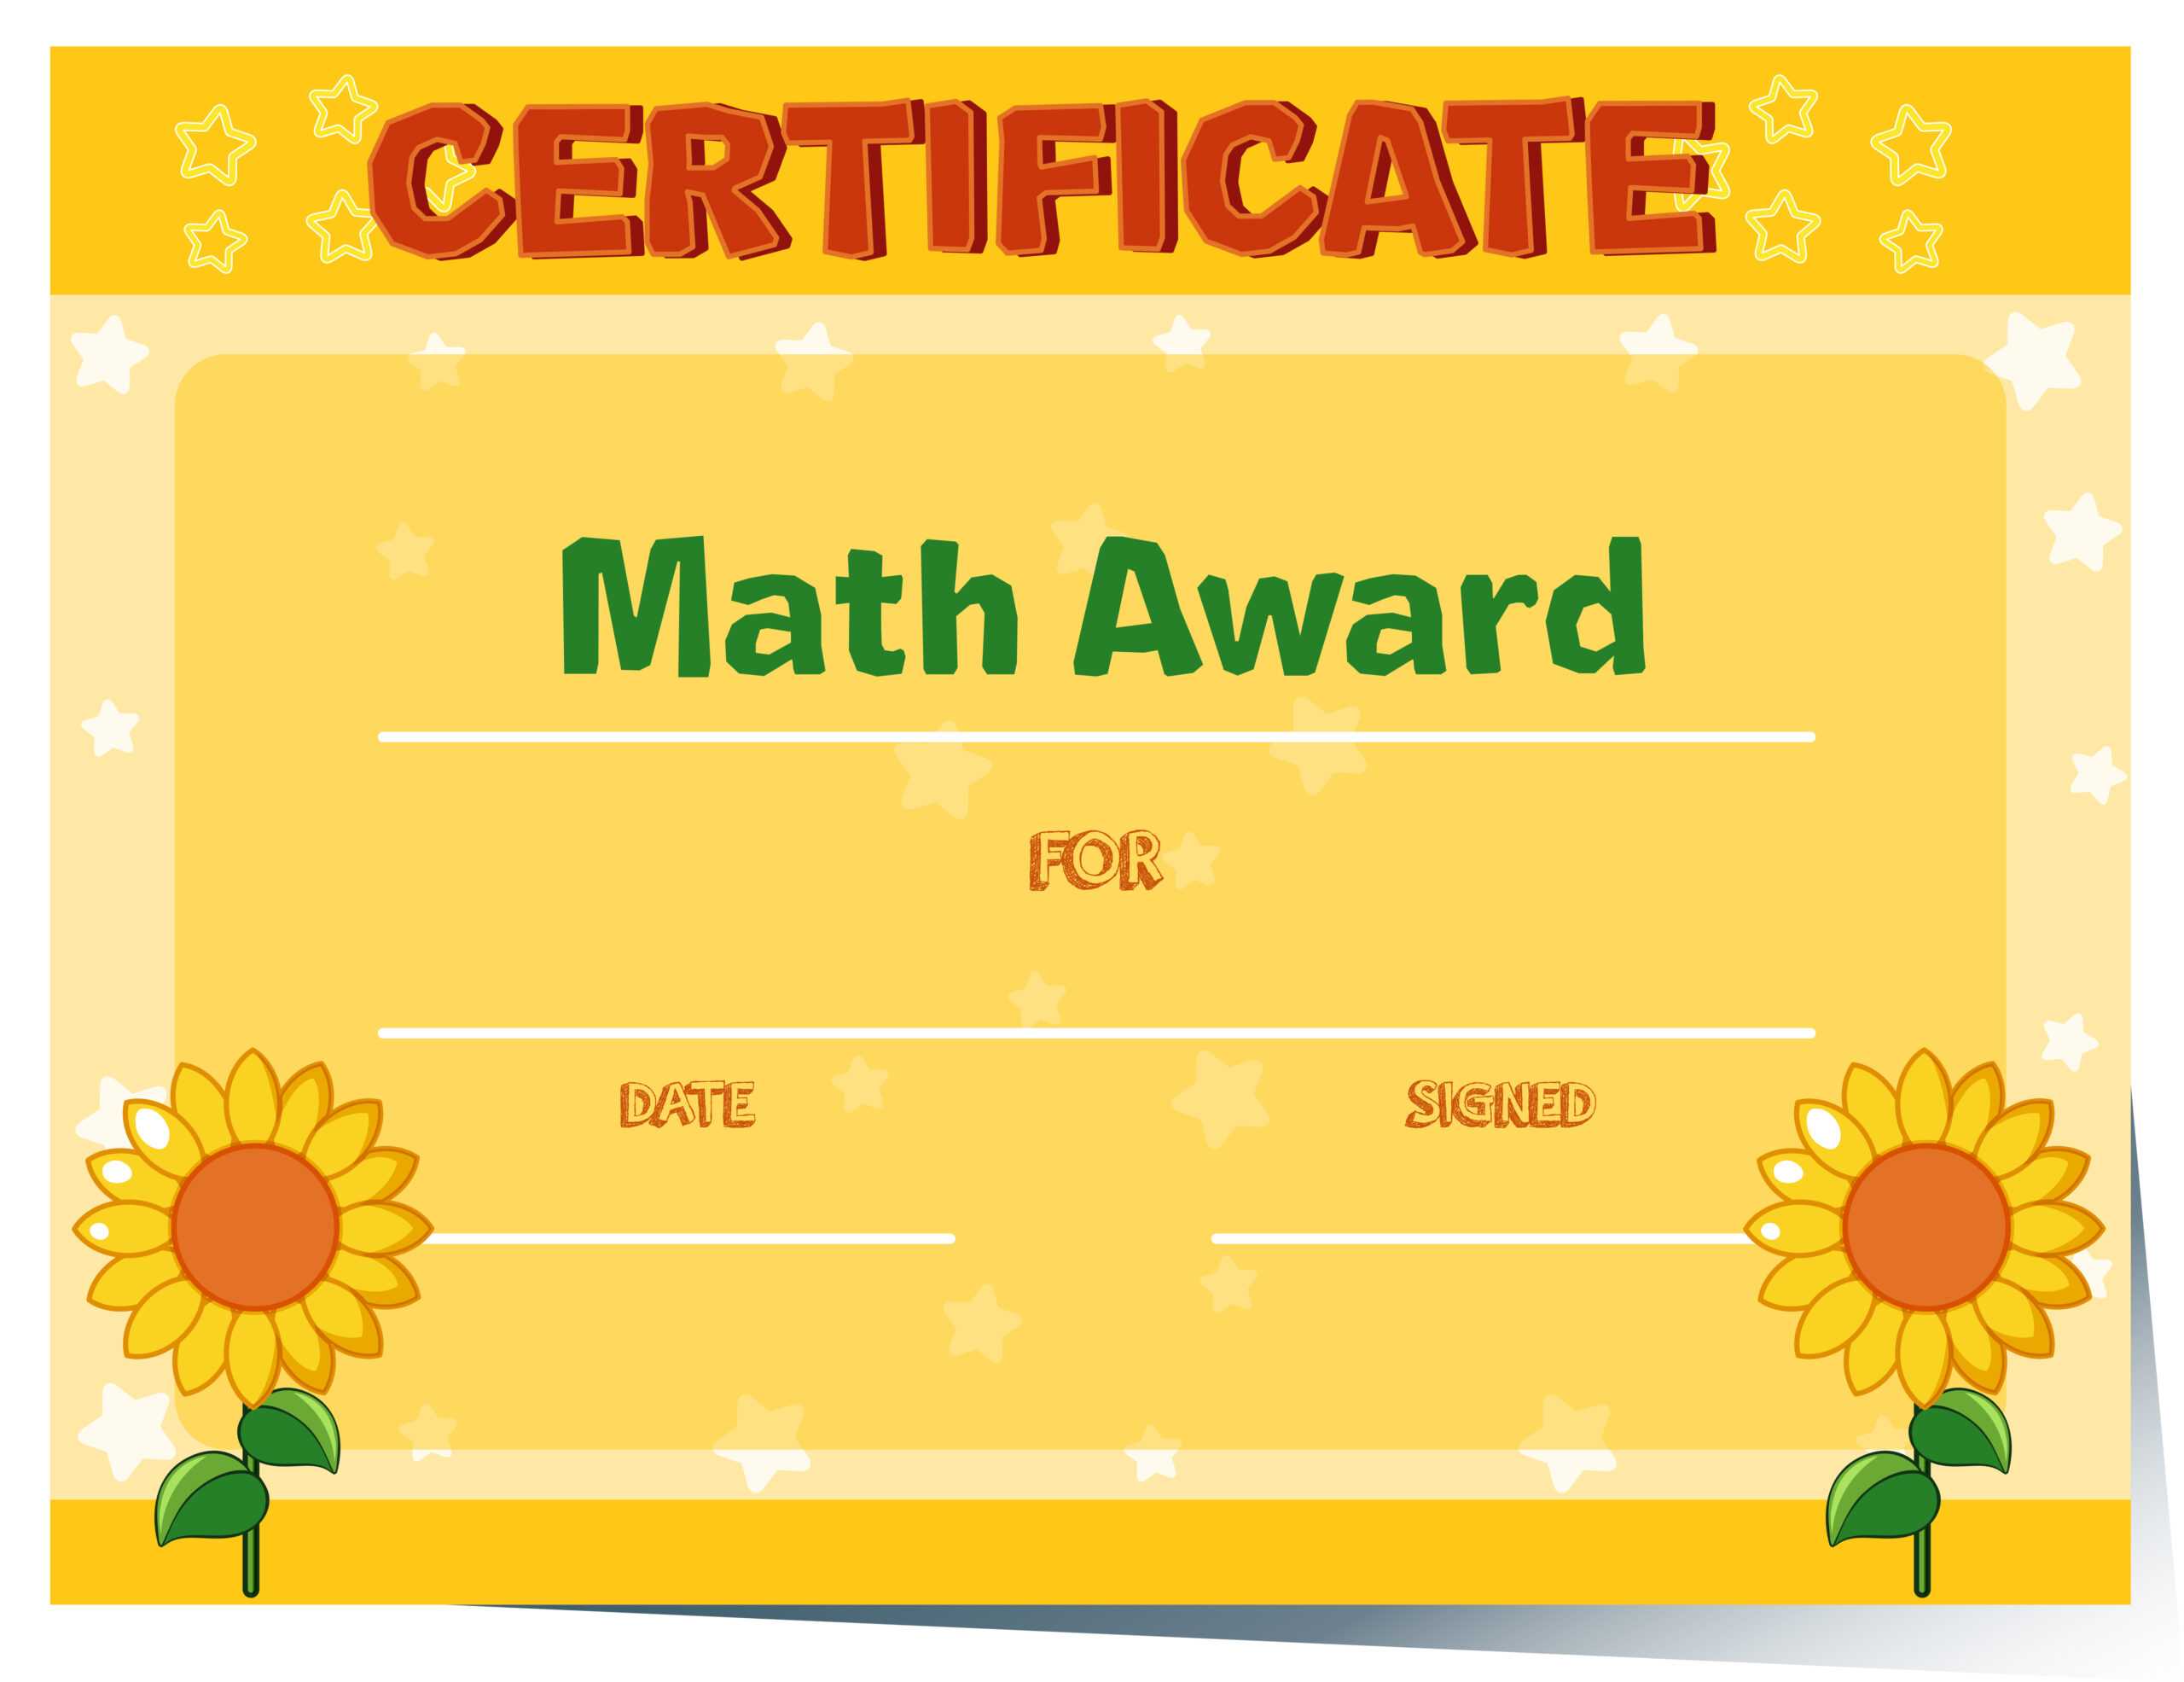 Certificate Template With Sunflowers In Background Within Math Certificate Template